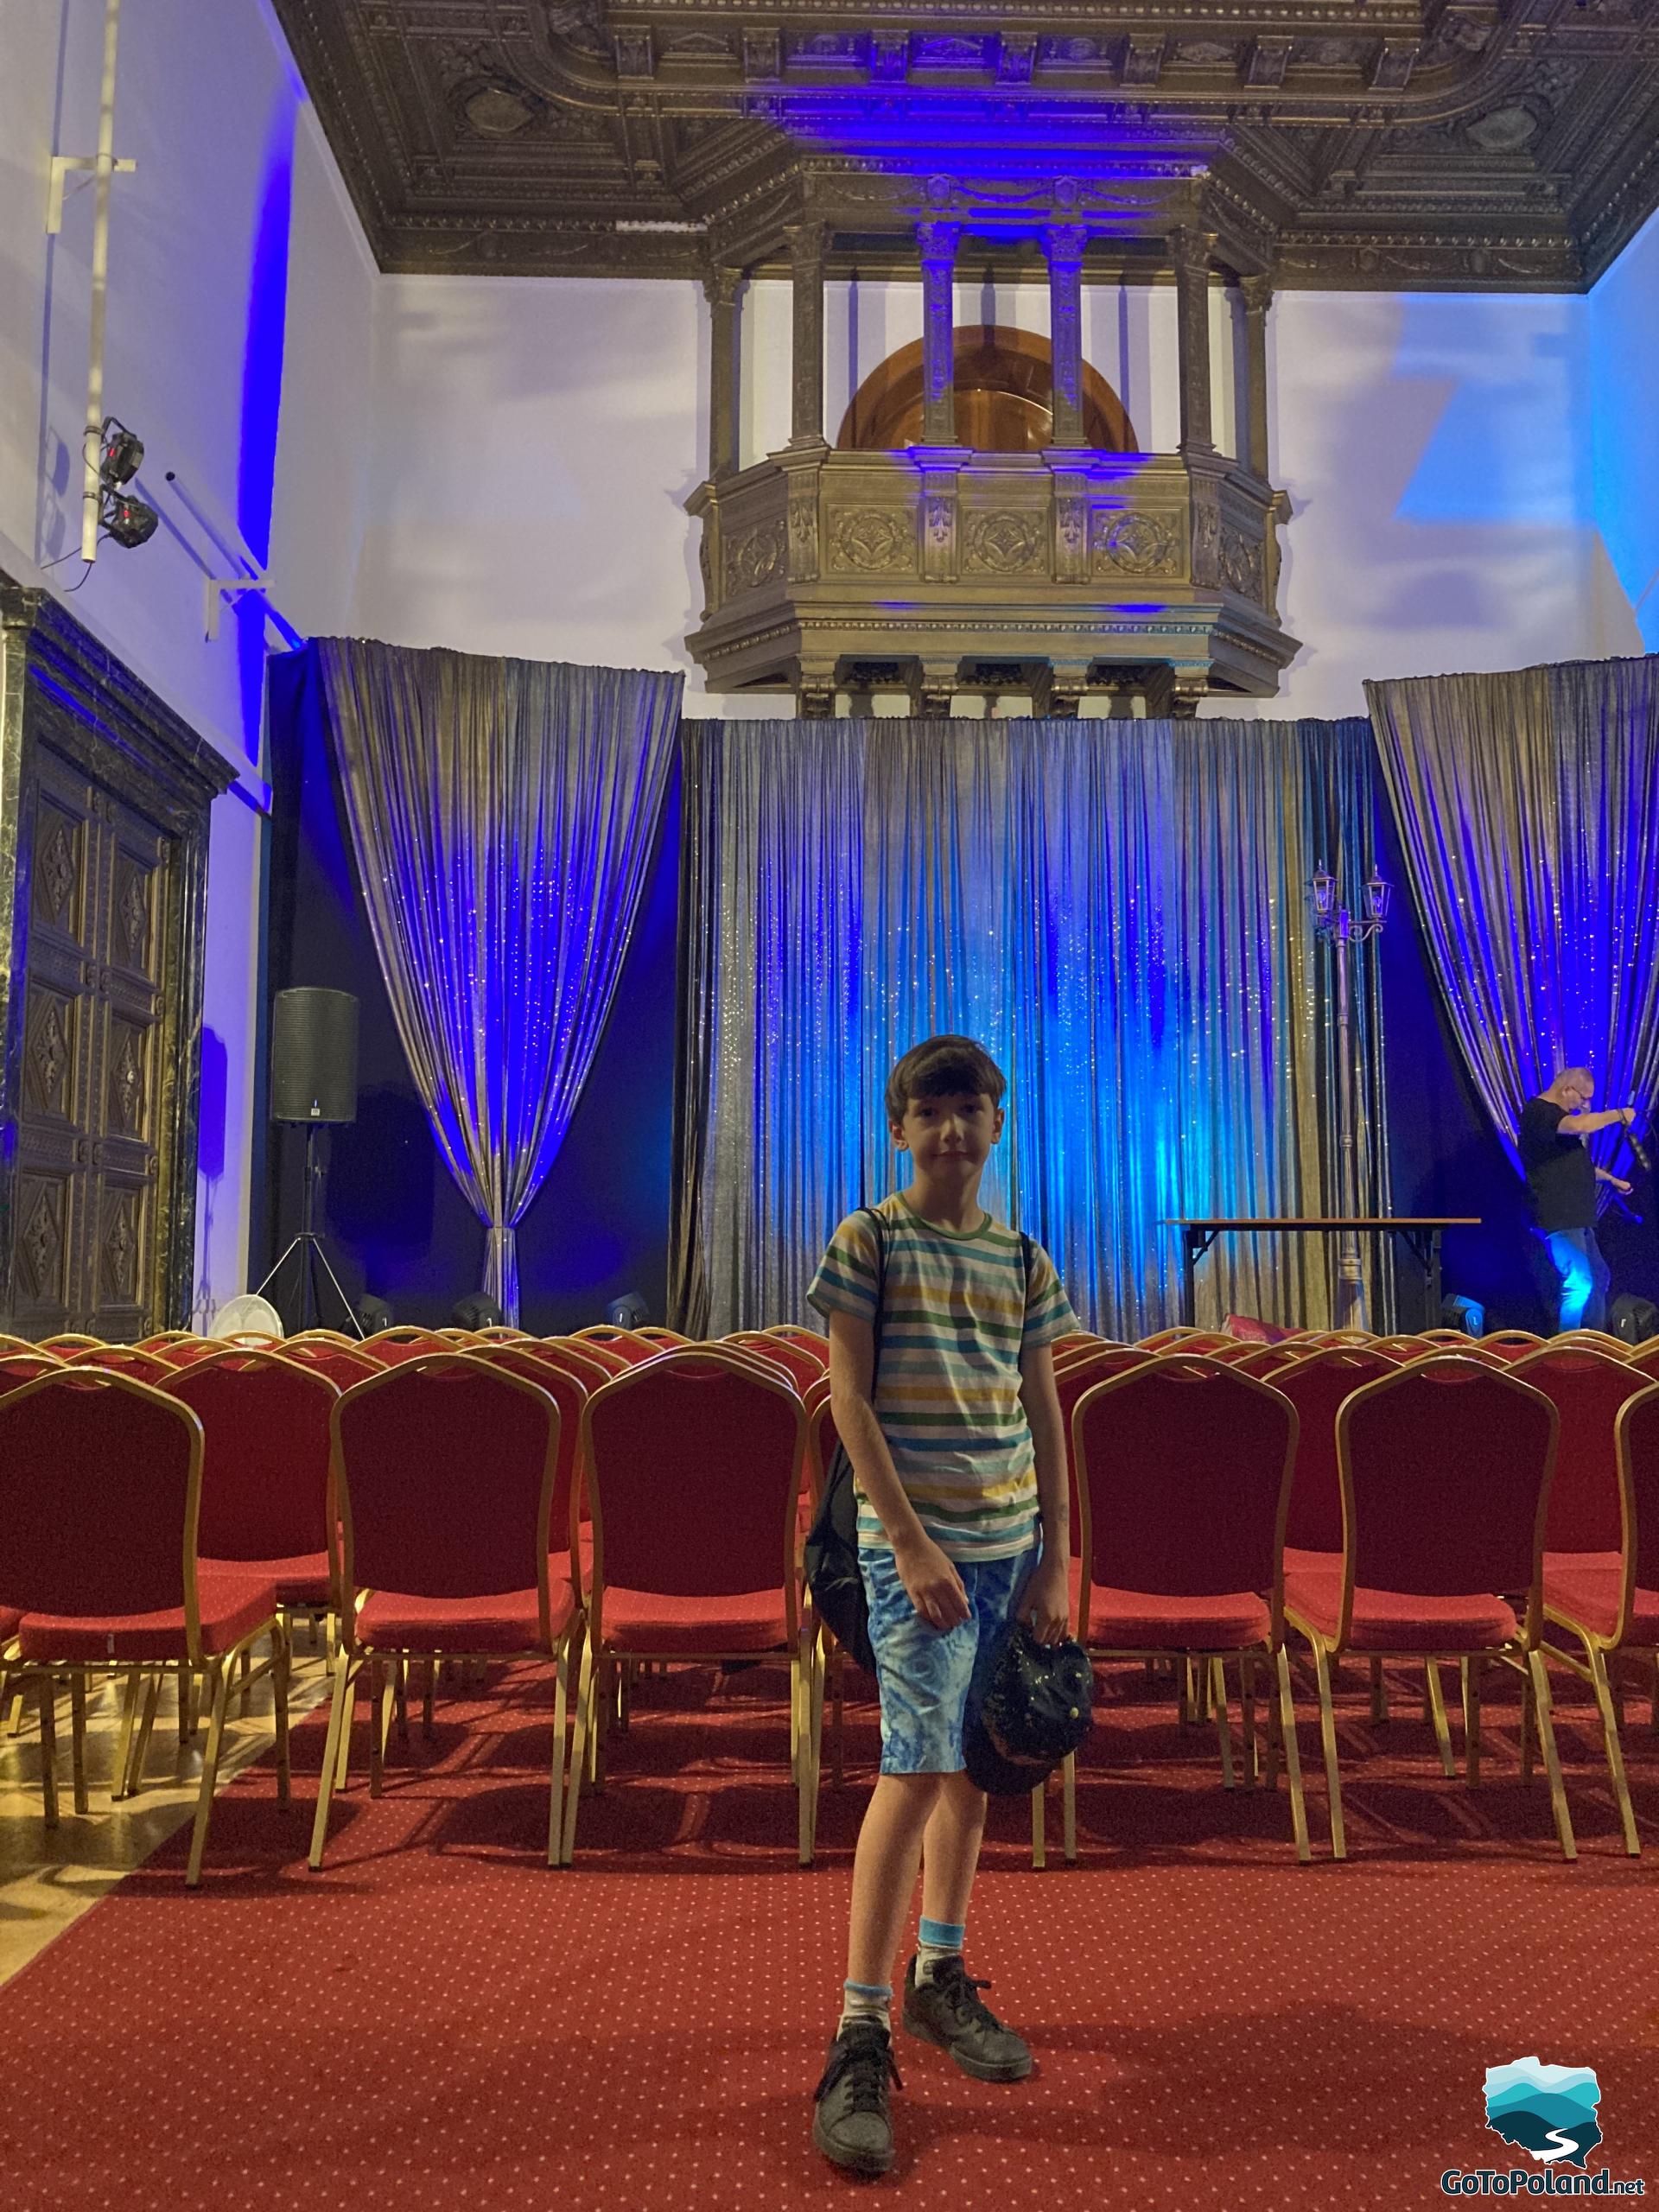 the boy stands in the hall, behind him a blue curtain and rows of red chairs